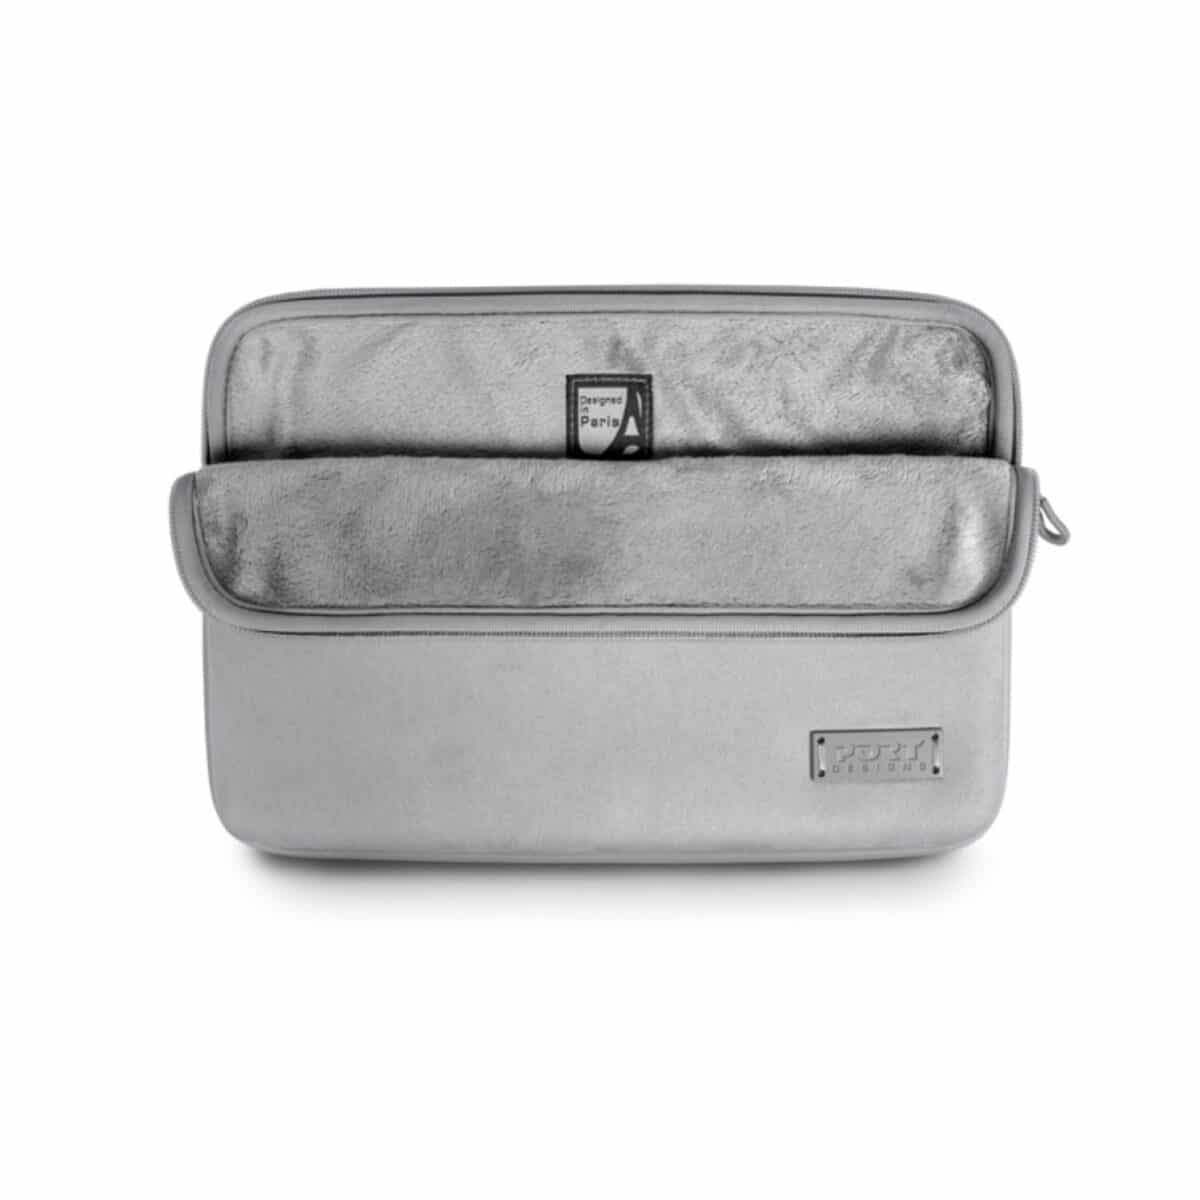 PORT MILANO - SLEEVE - 13.0 INCH - SILVER